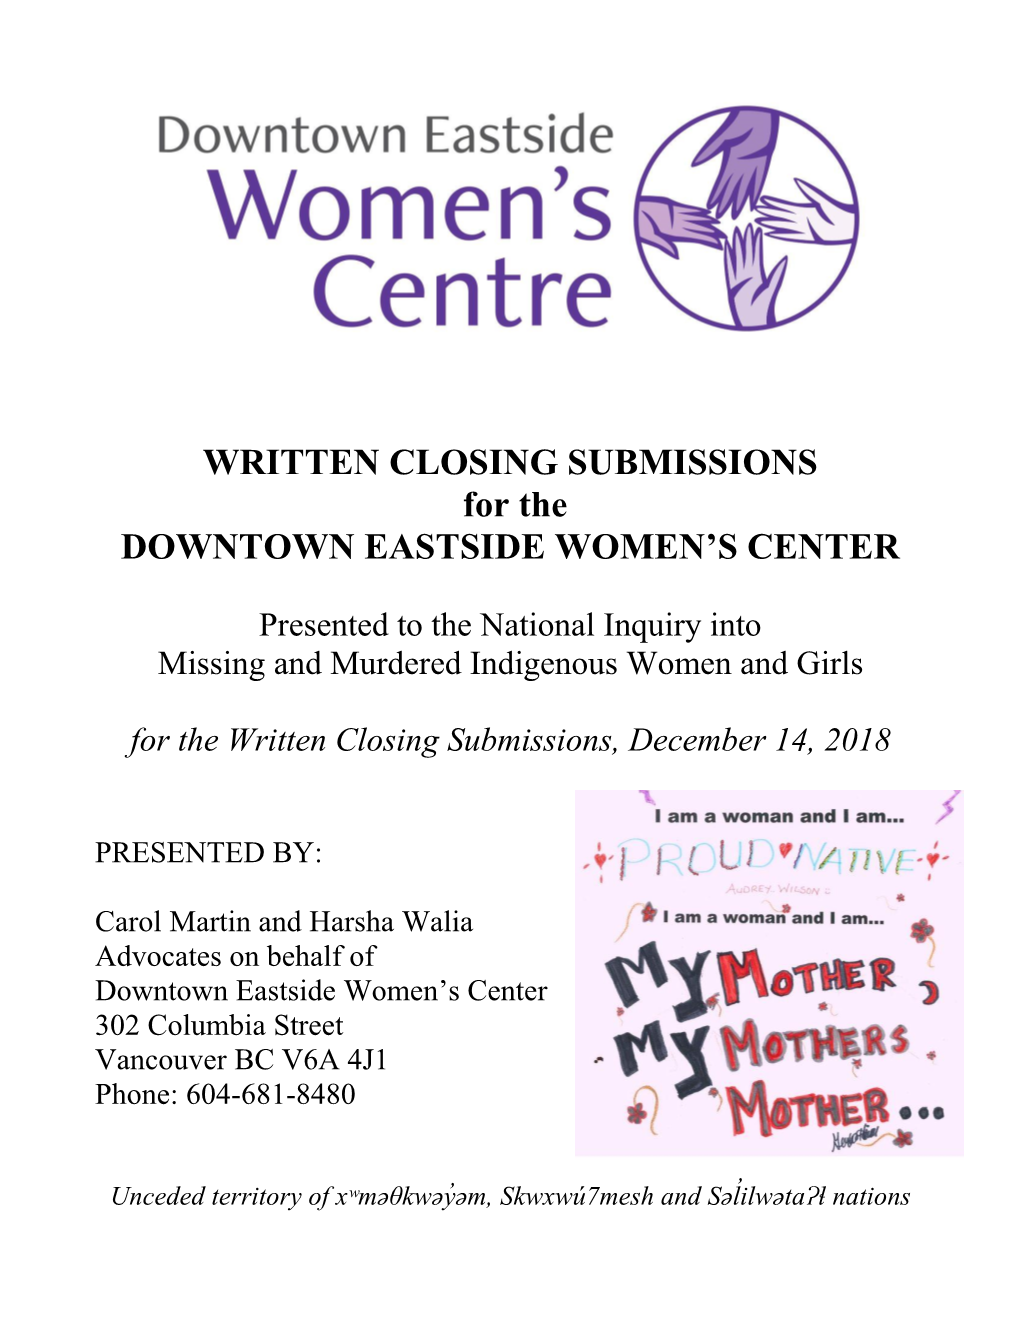 WRITTEN CLOSING SUBMISSIONS for the DOWNTOWN EASTSIDE WOMEN’S CENTER